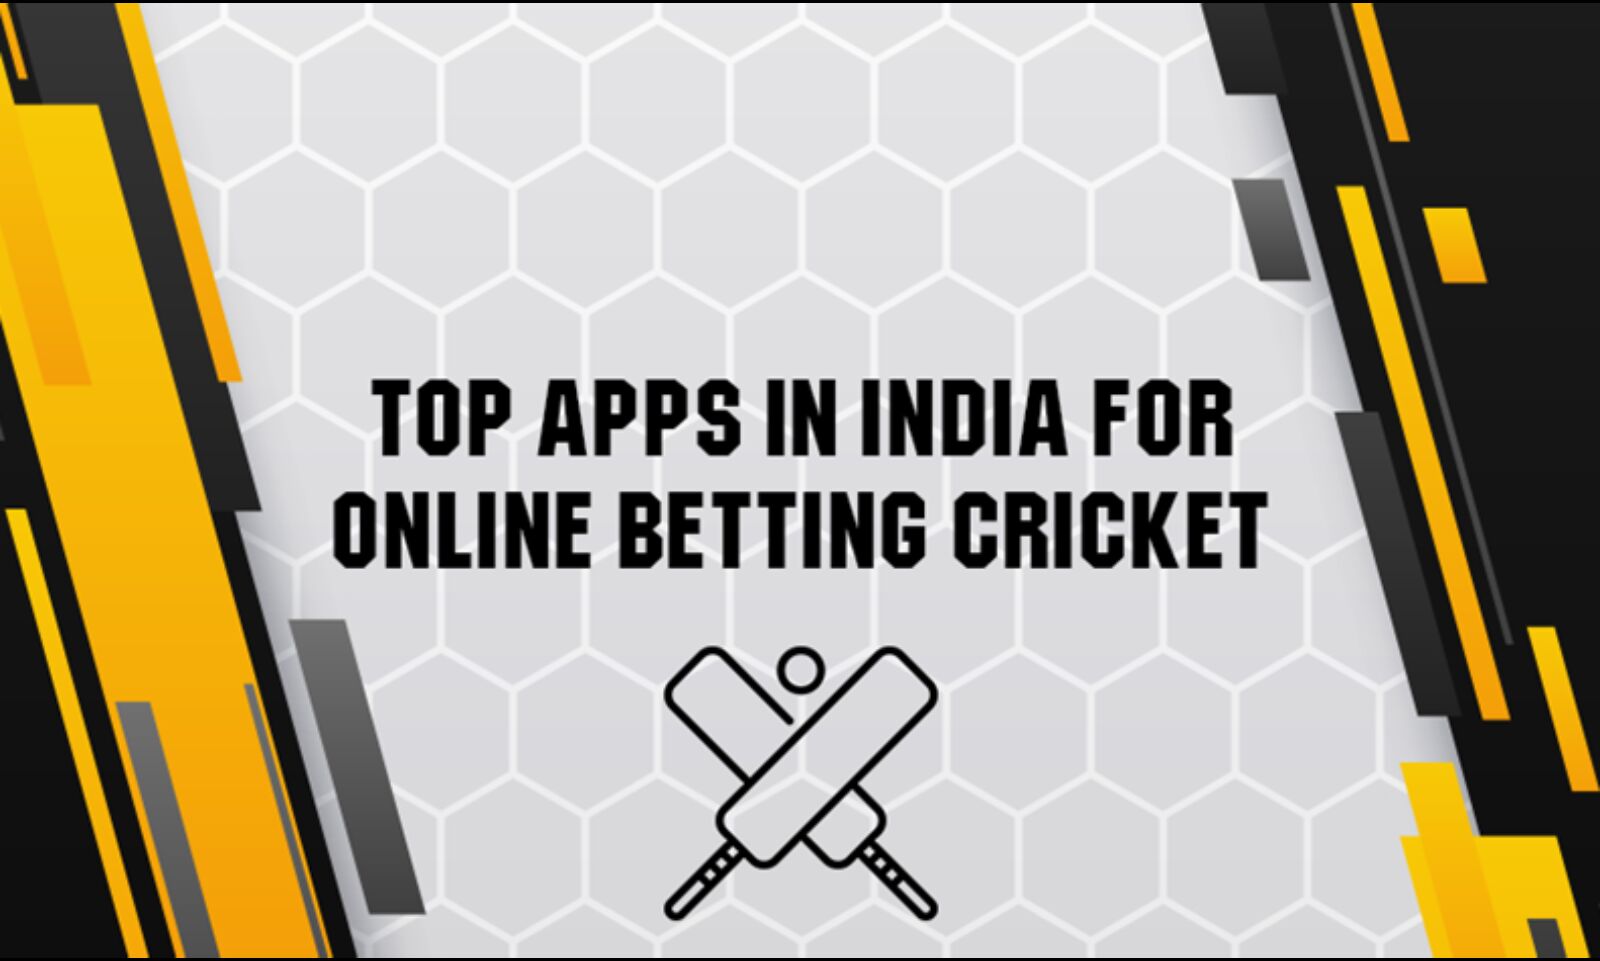 OMG! The Best Indian Cricket Betting App Download Ever!